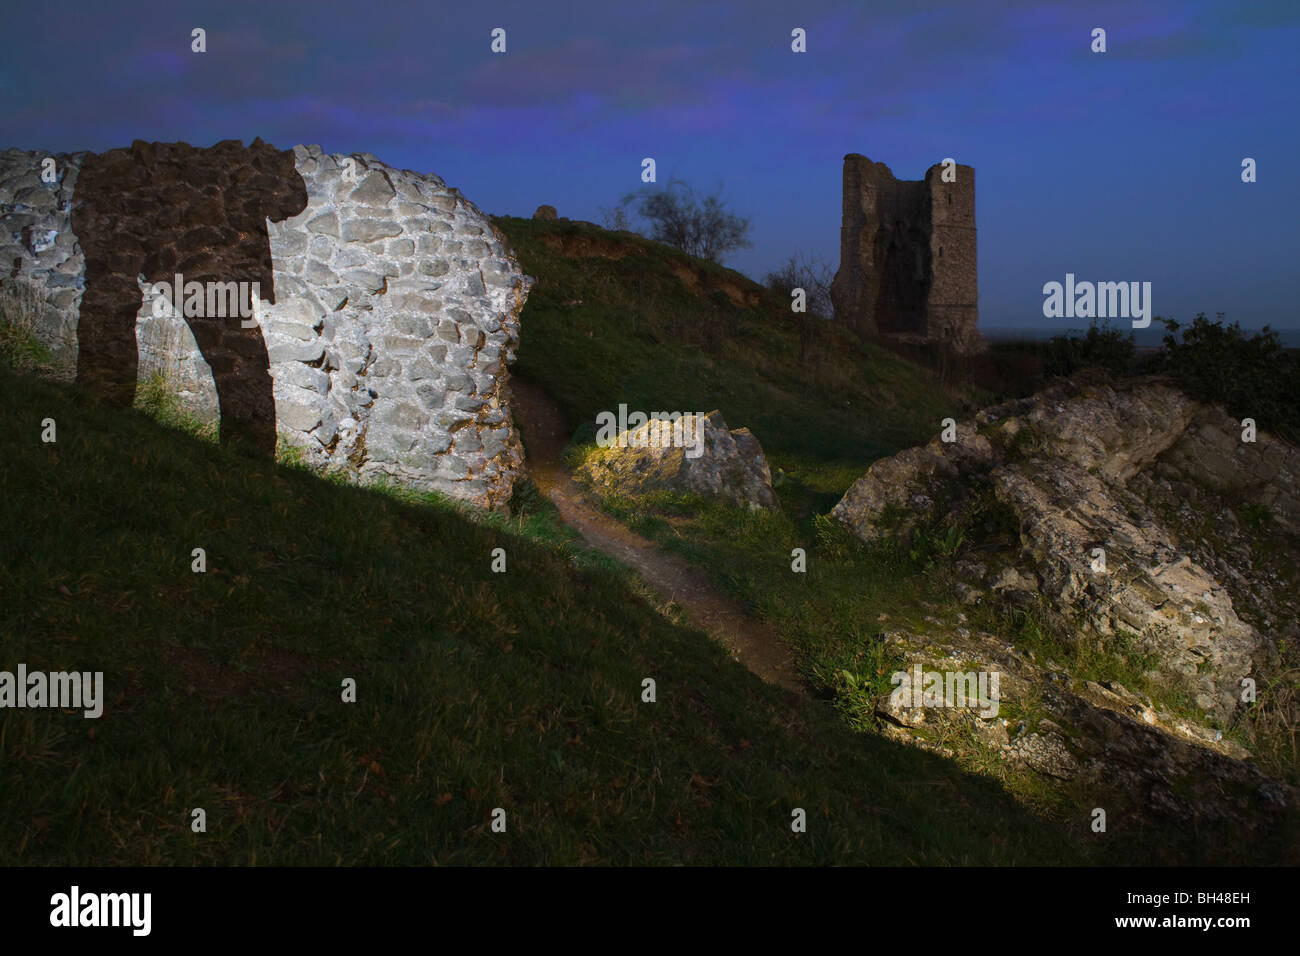 Ruined castle walls and tower of Hadleigh castle at twilight with lighting effects and a shadowy figure. Stock Photo